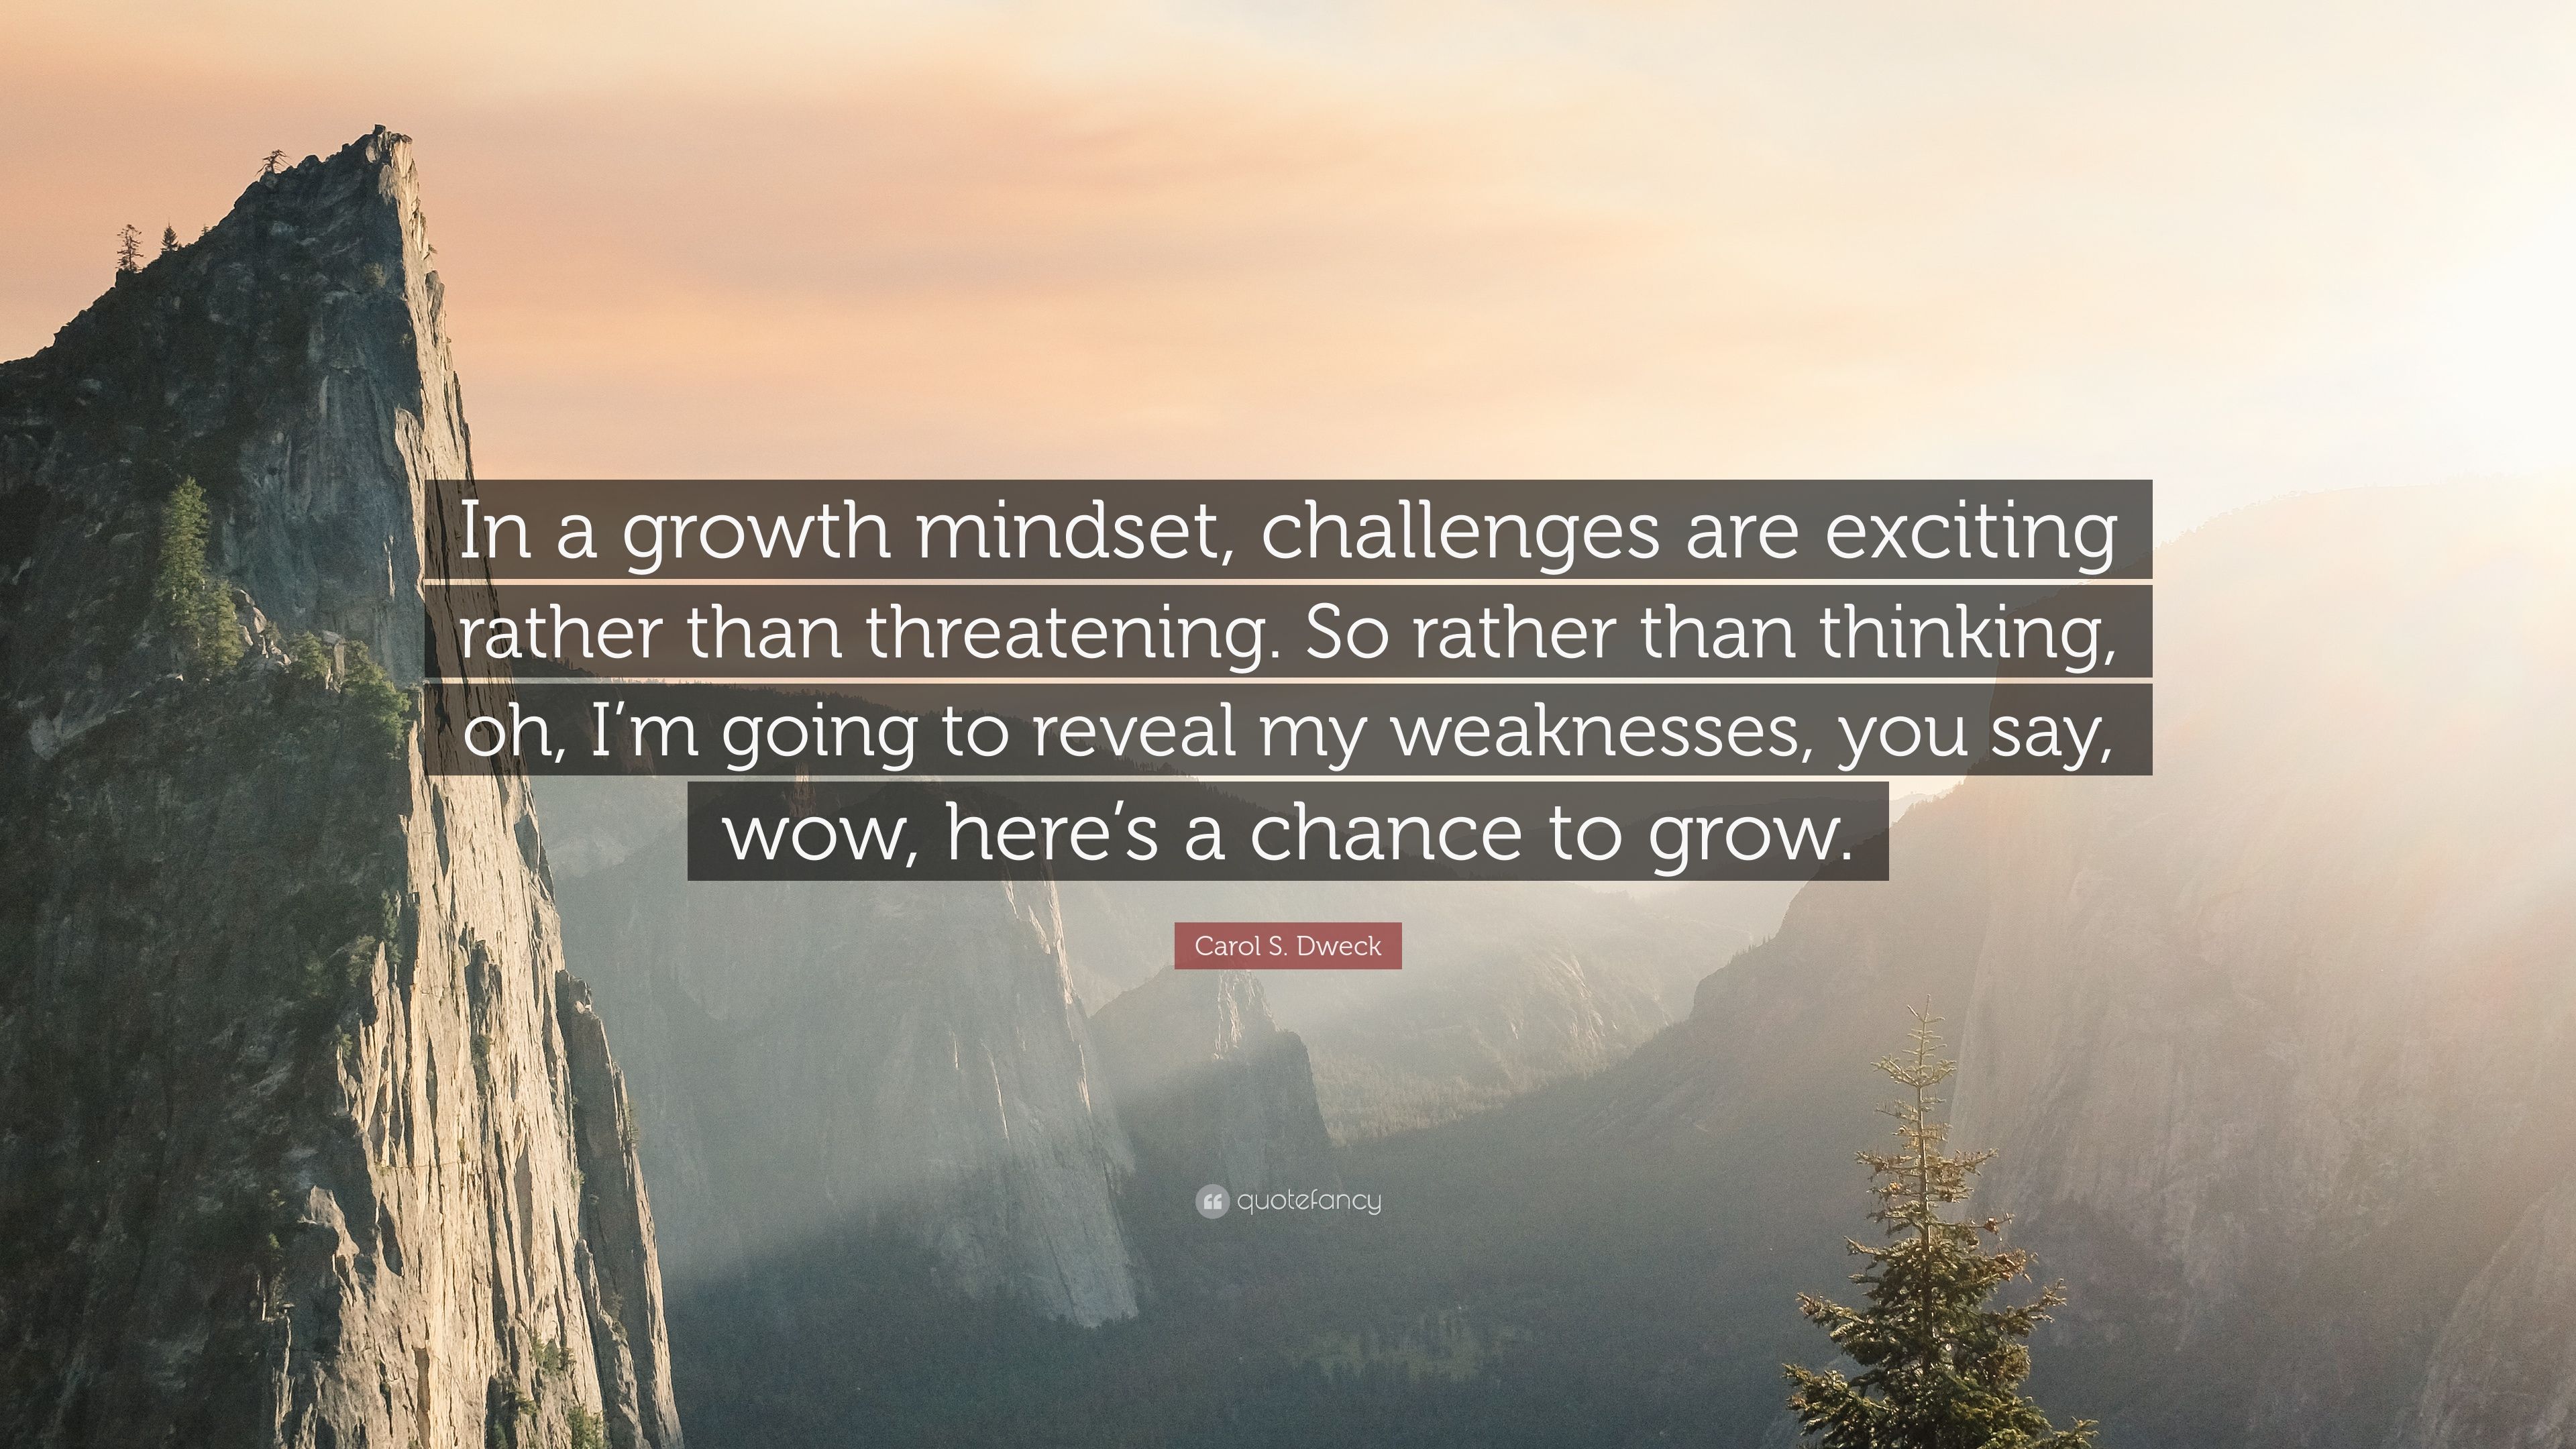 Carol S. Dweck Quote: “In a growth mindset, challenges are